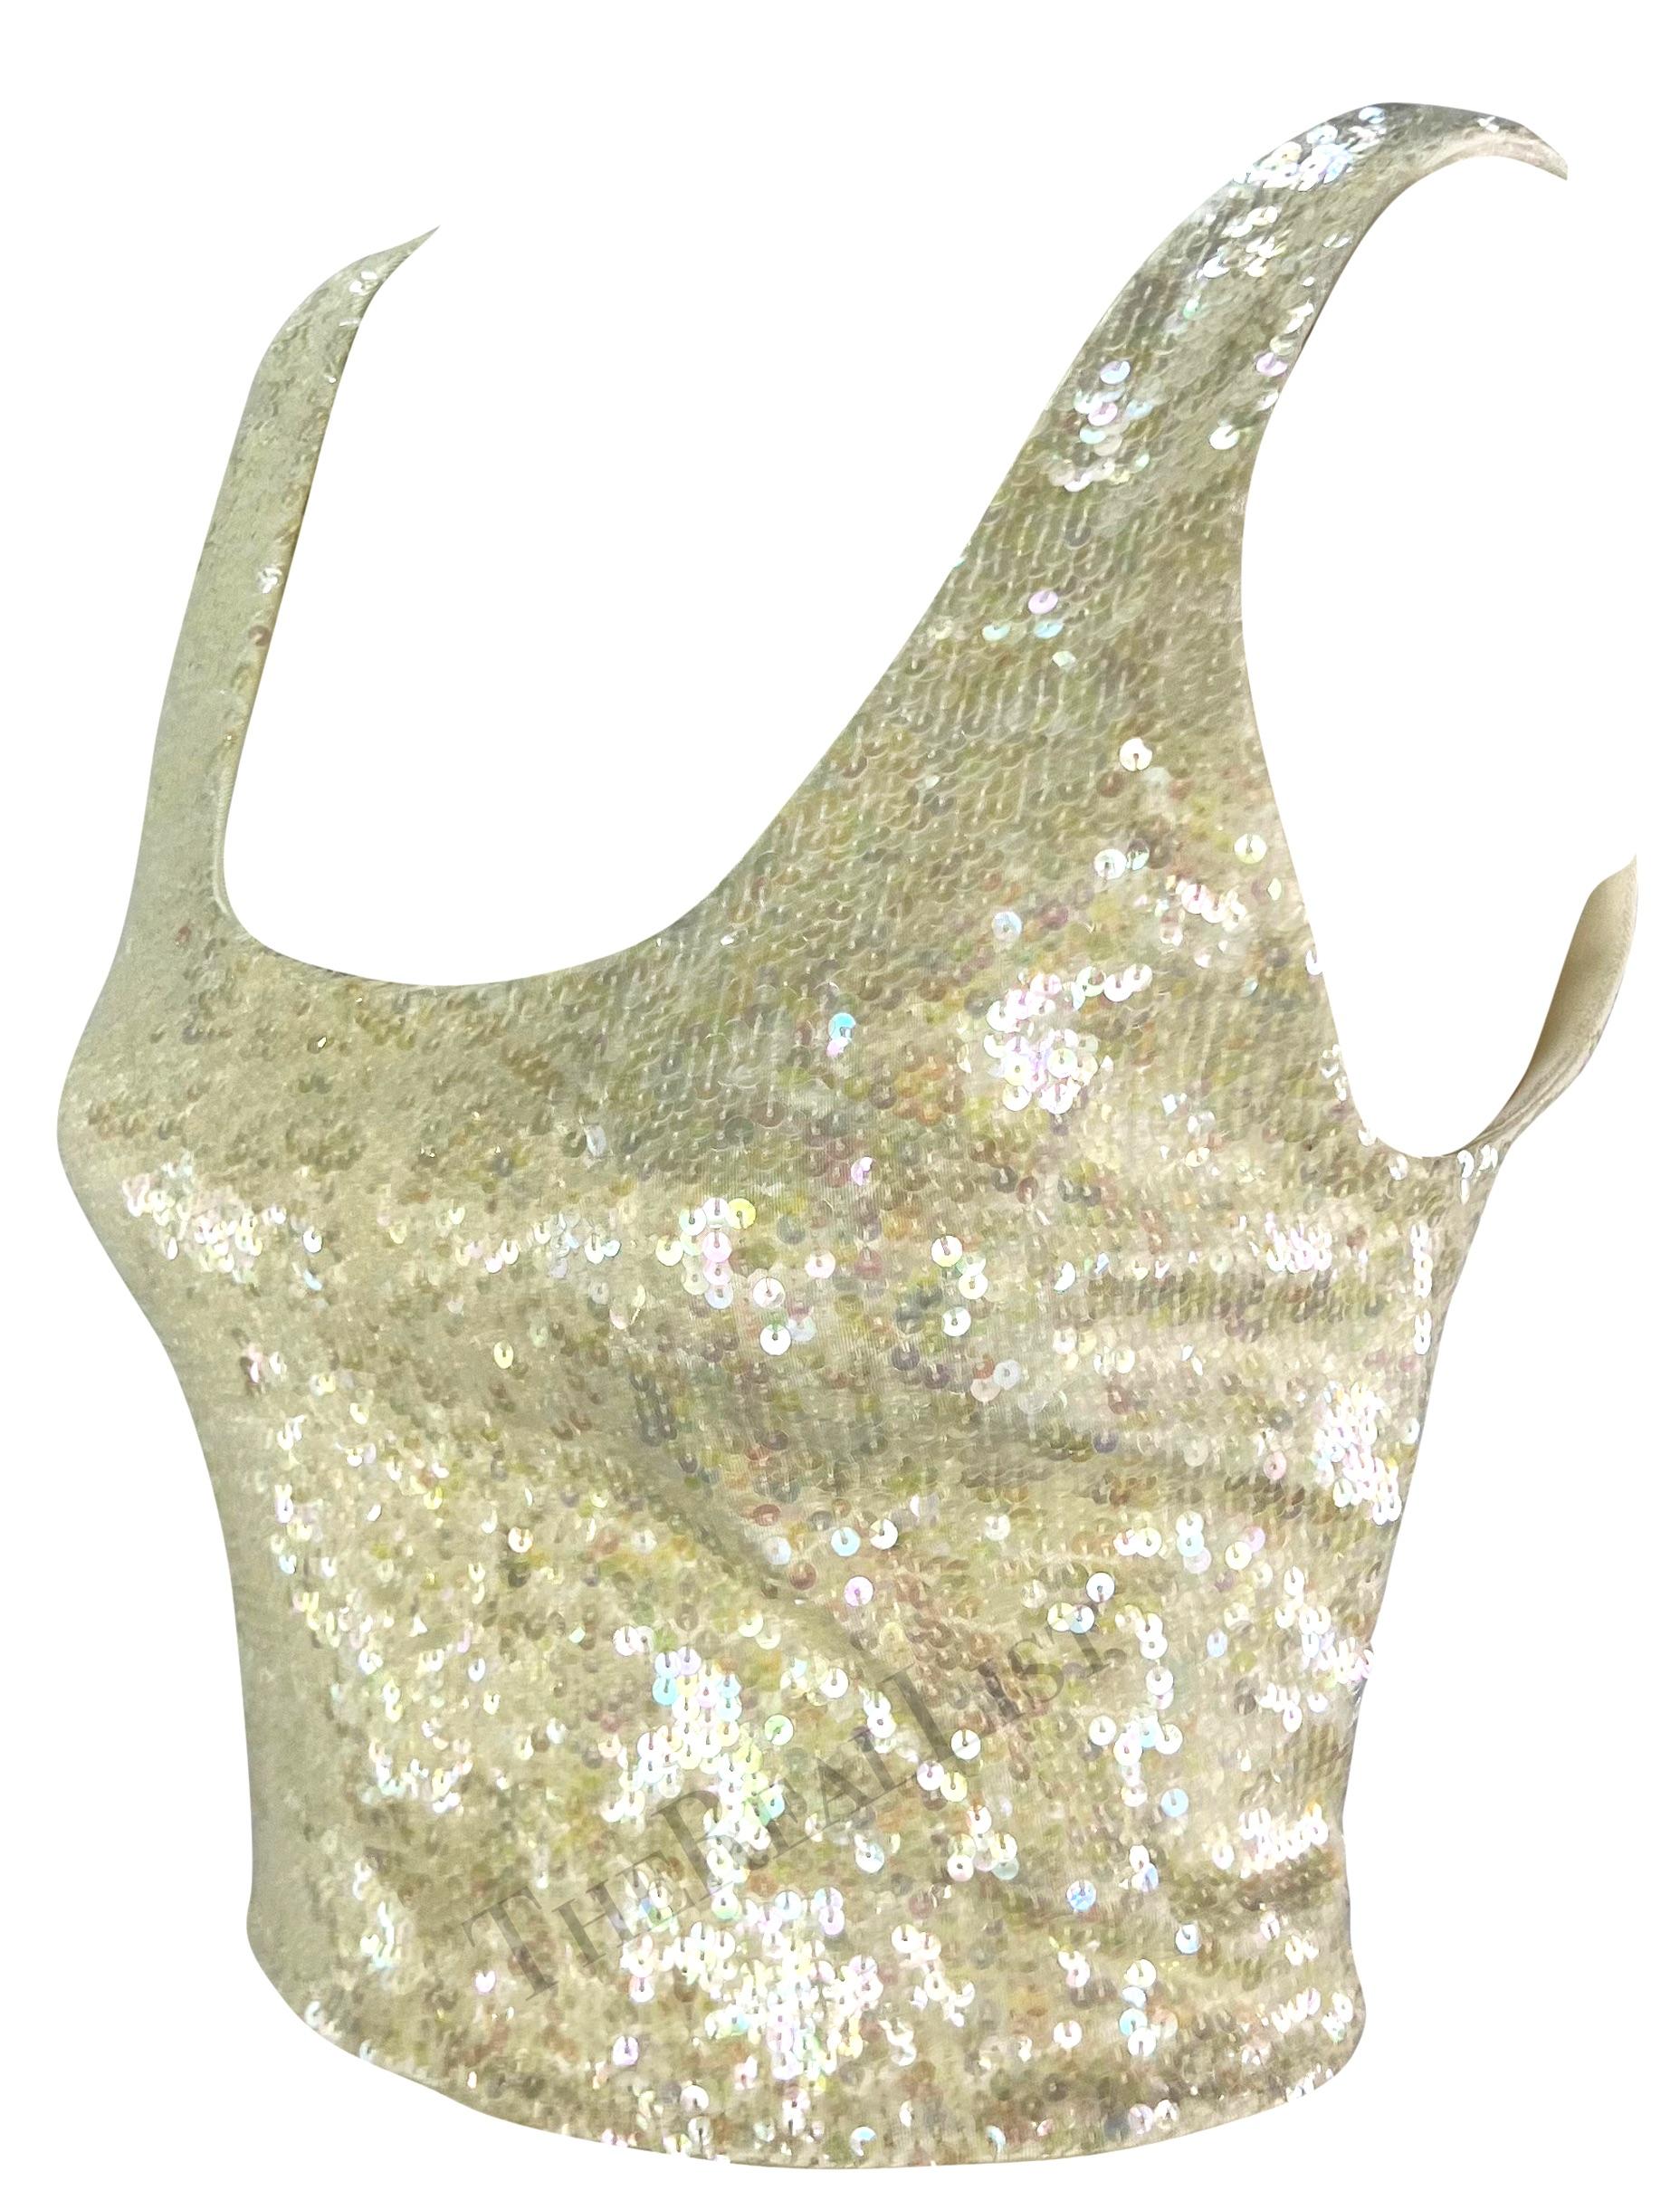 1990s Ralph Lauren Irridescent Sequin White Stretch Crop Top In Excellent Condition For Sale In West Hollywood, CA